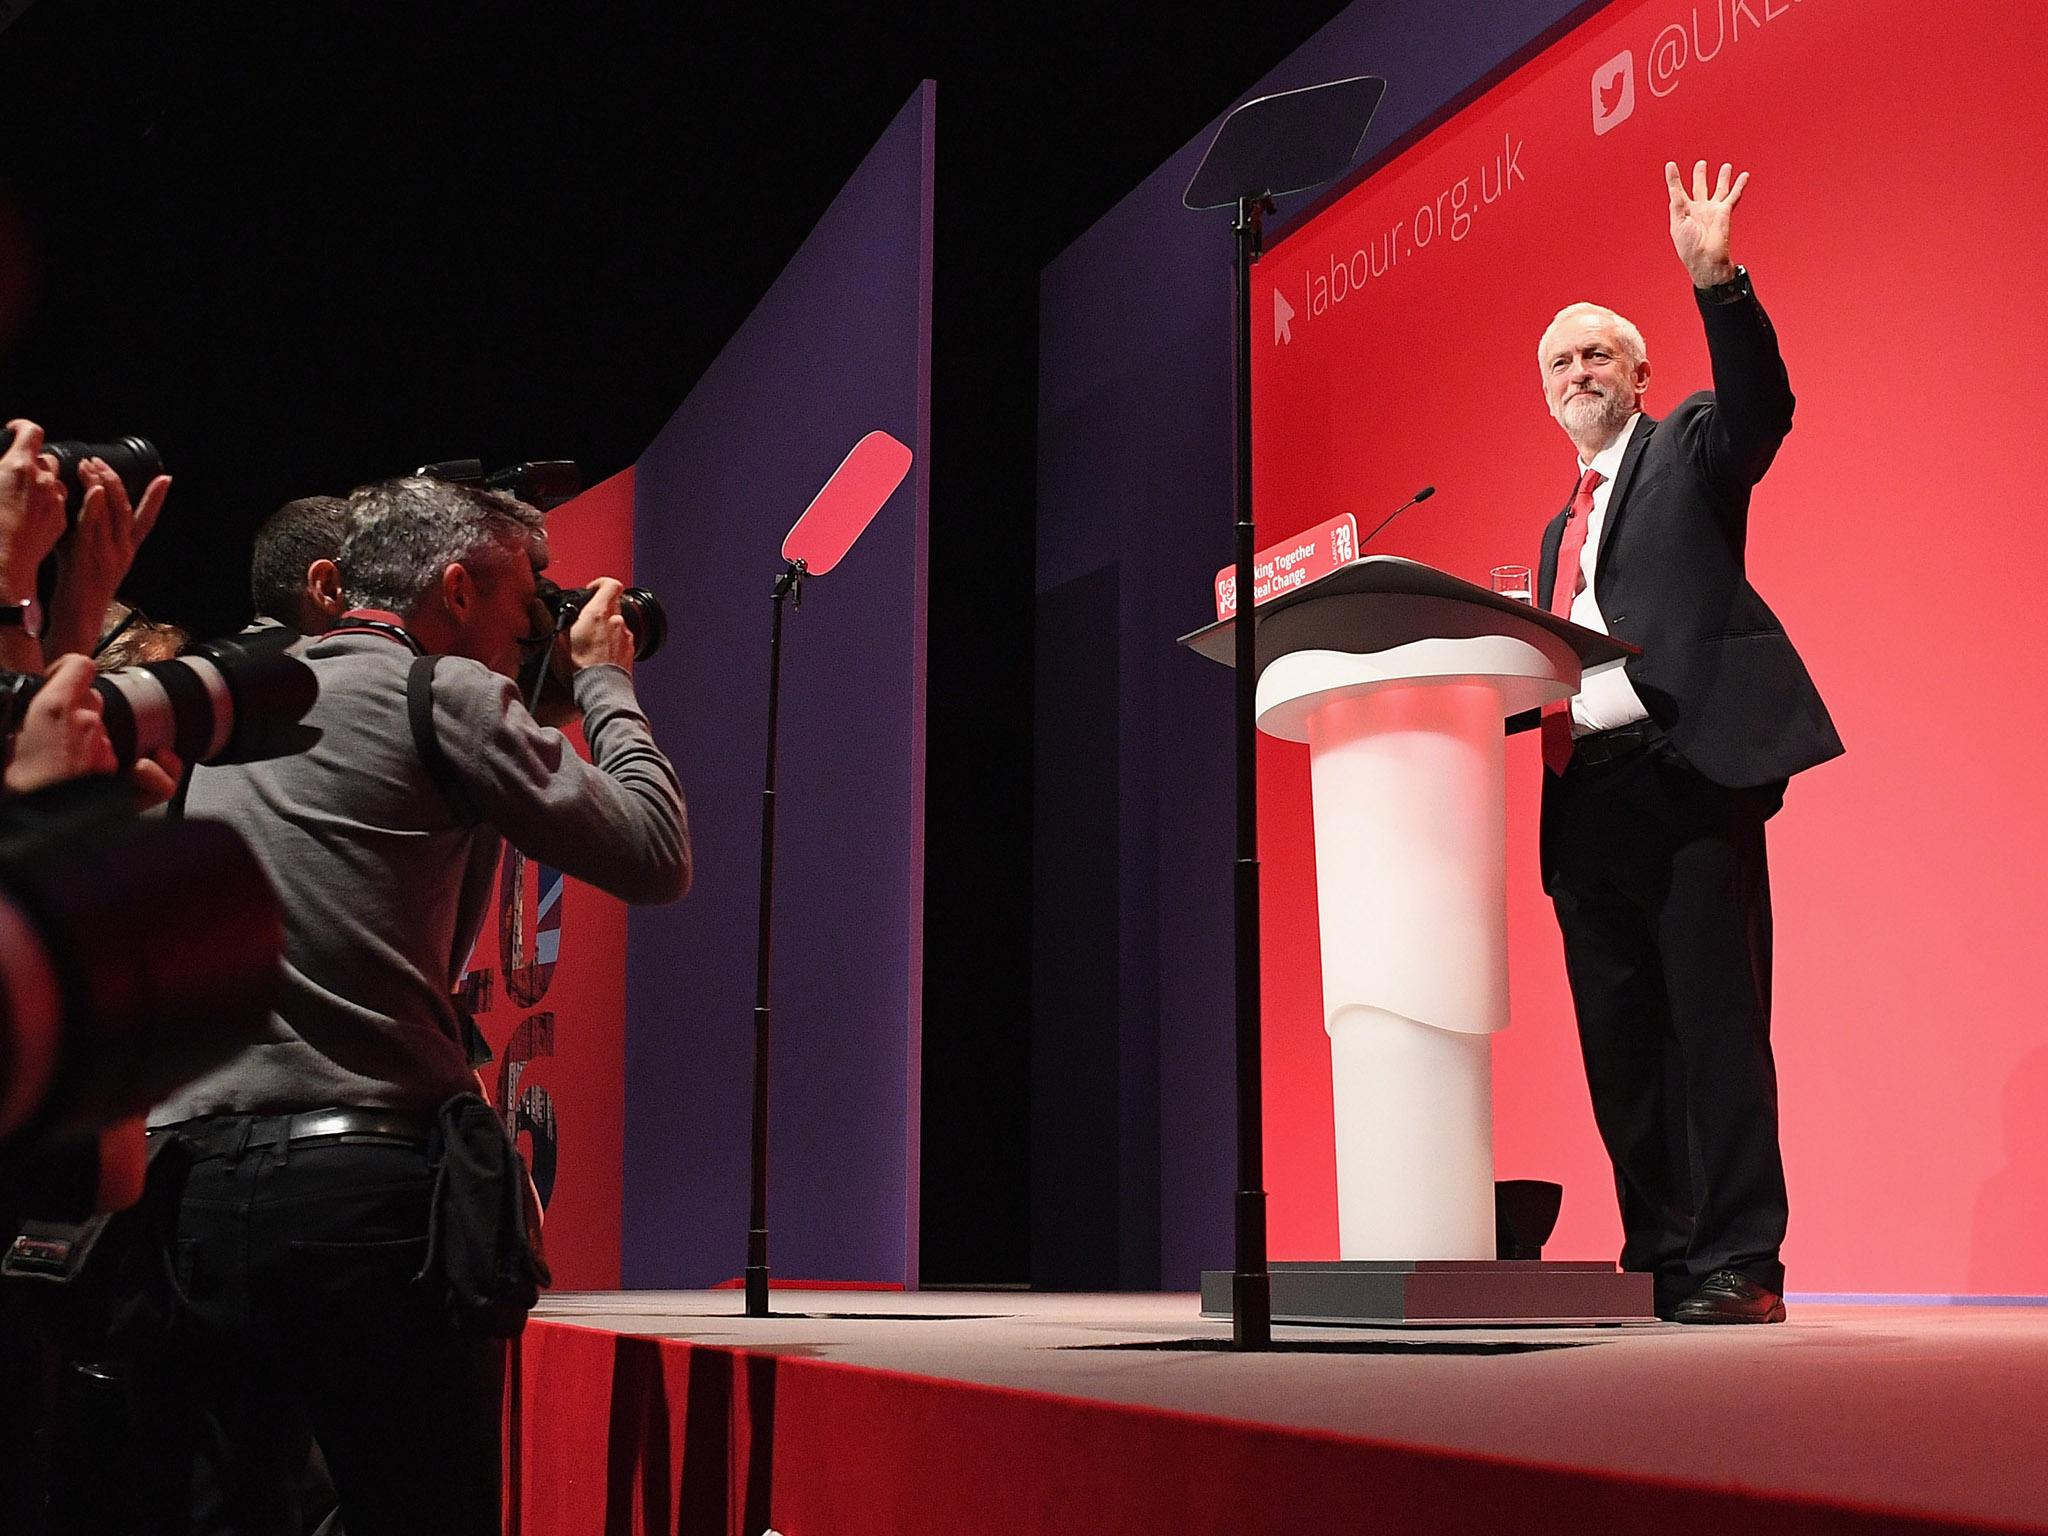 Jeremy Corbyn used his speech to the Labour conference to call on party members to unite